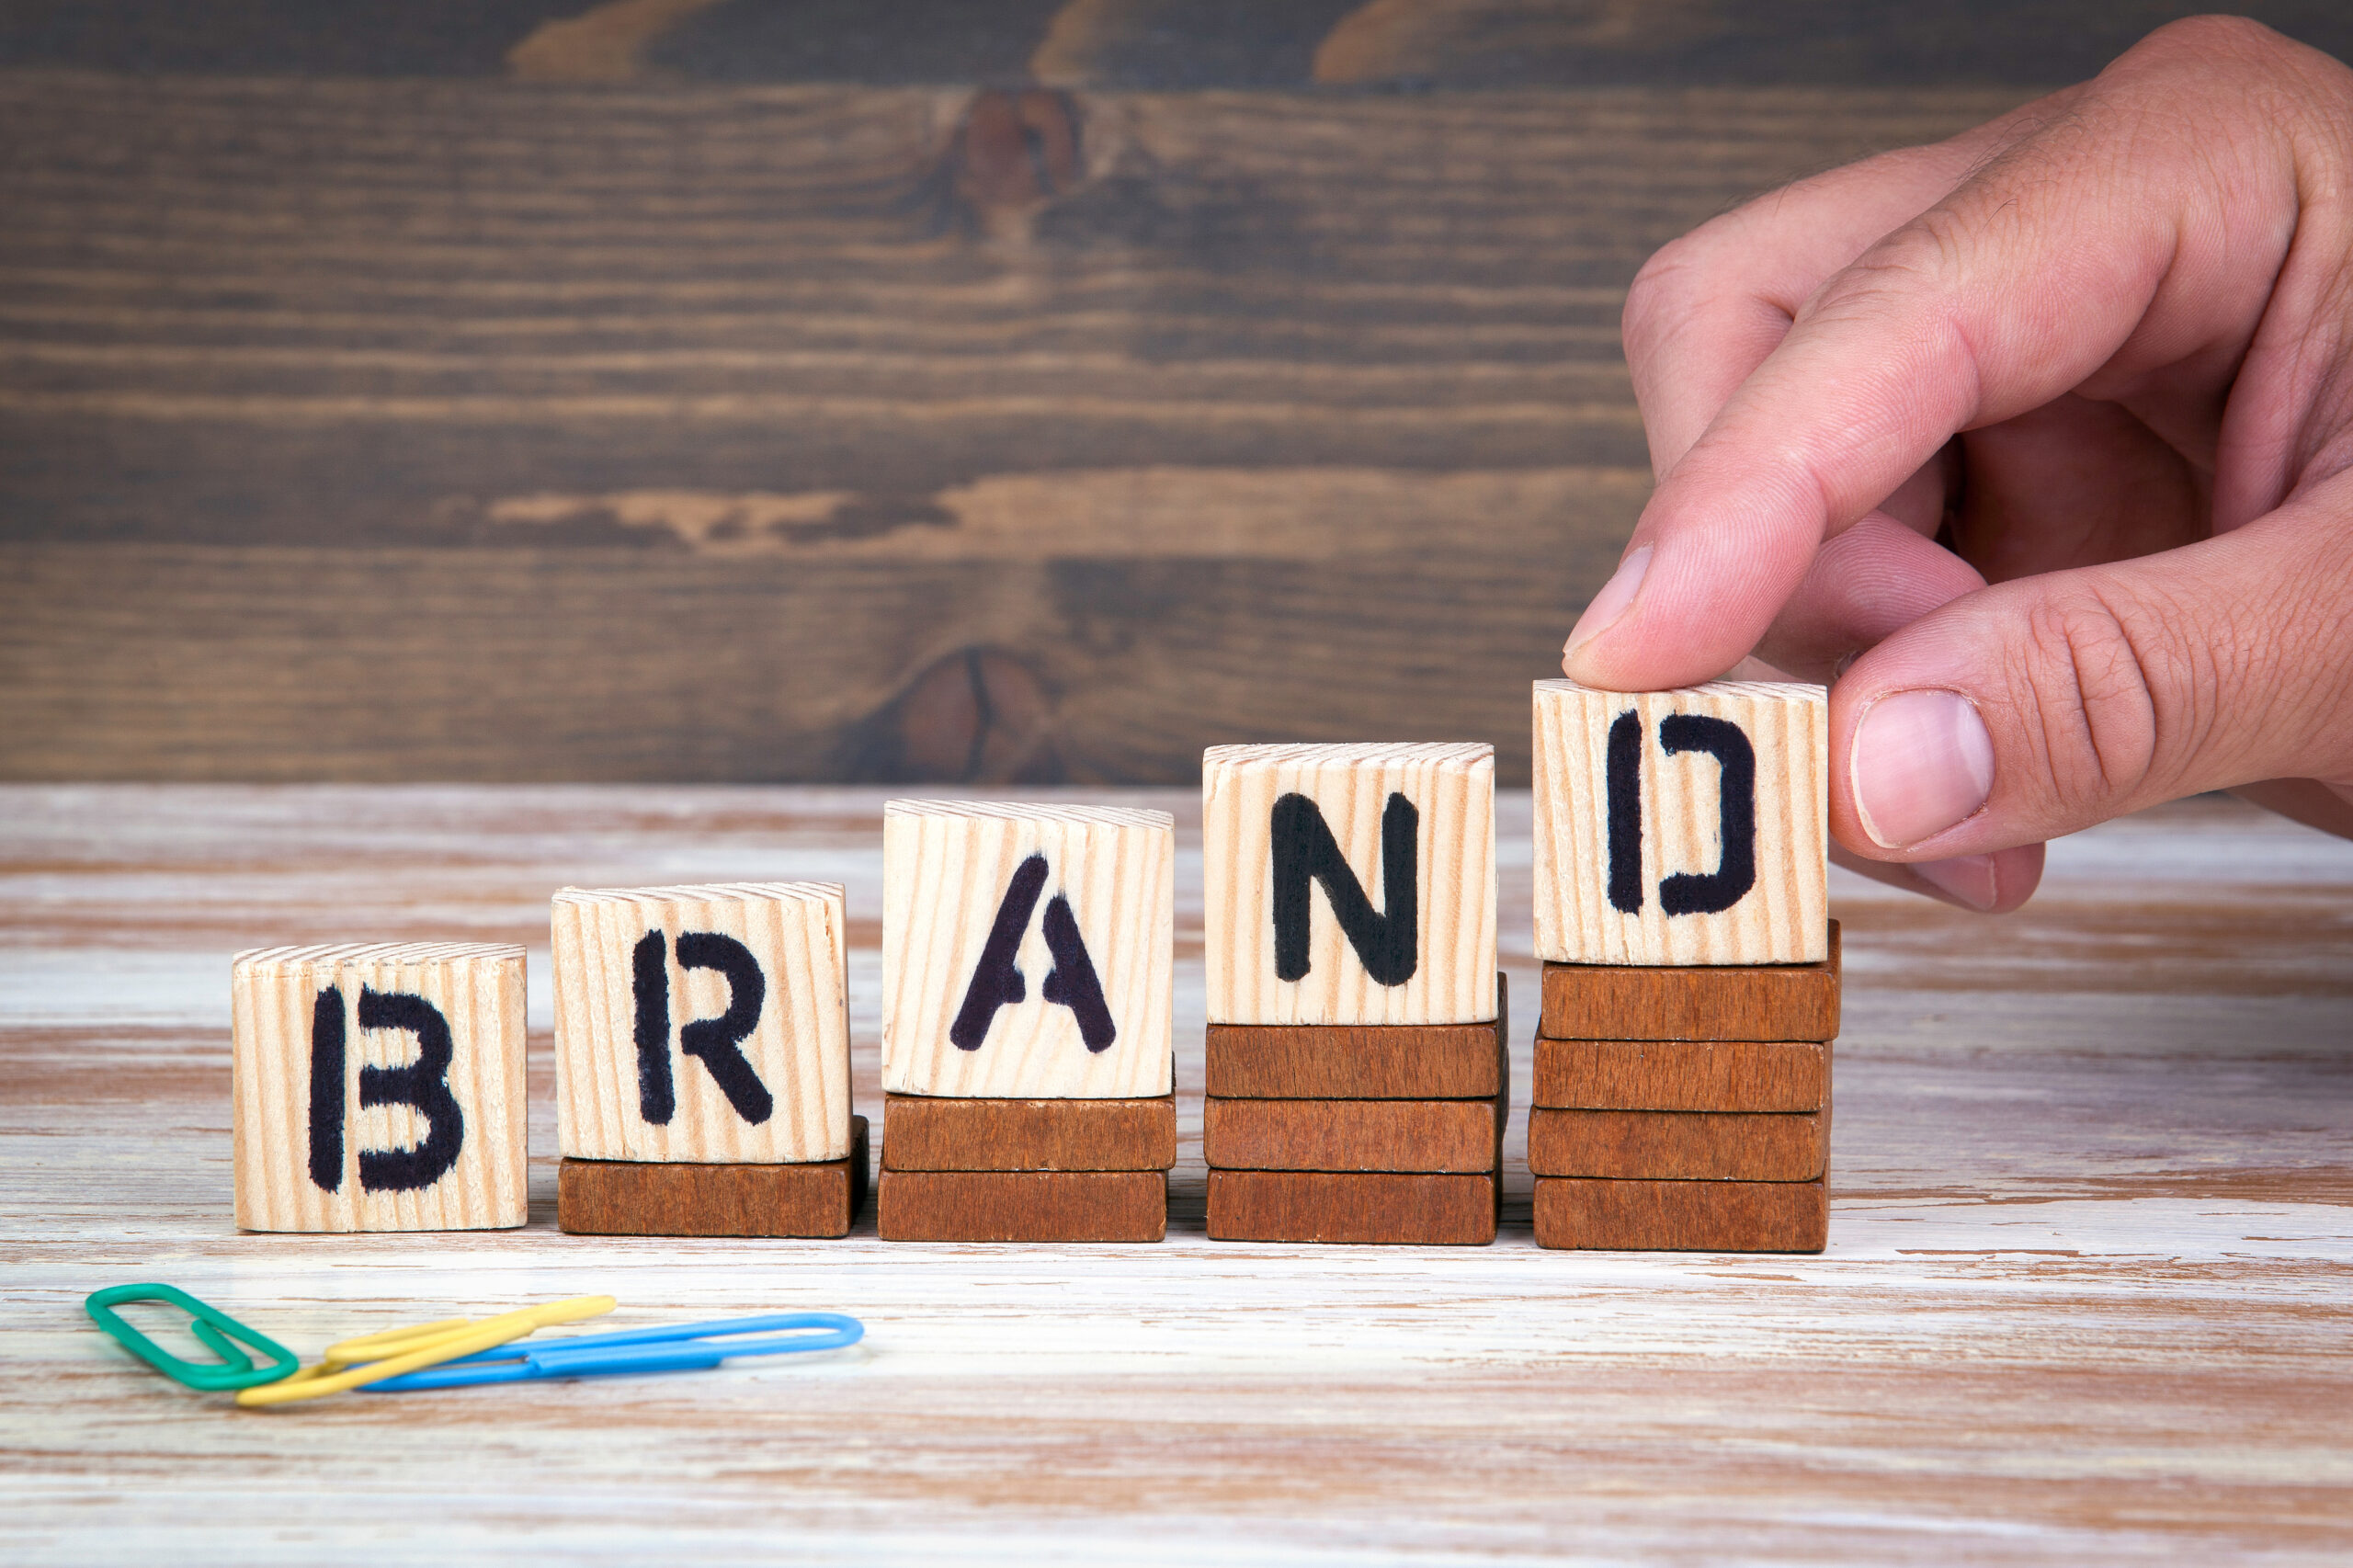 Improve Your Brand Image and Outsource to the Experts